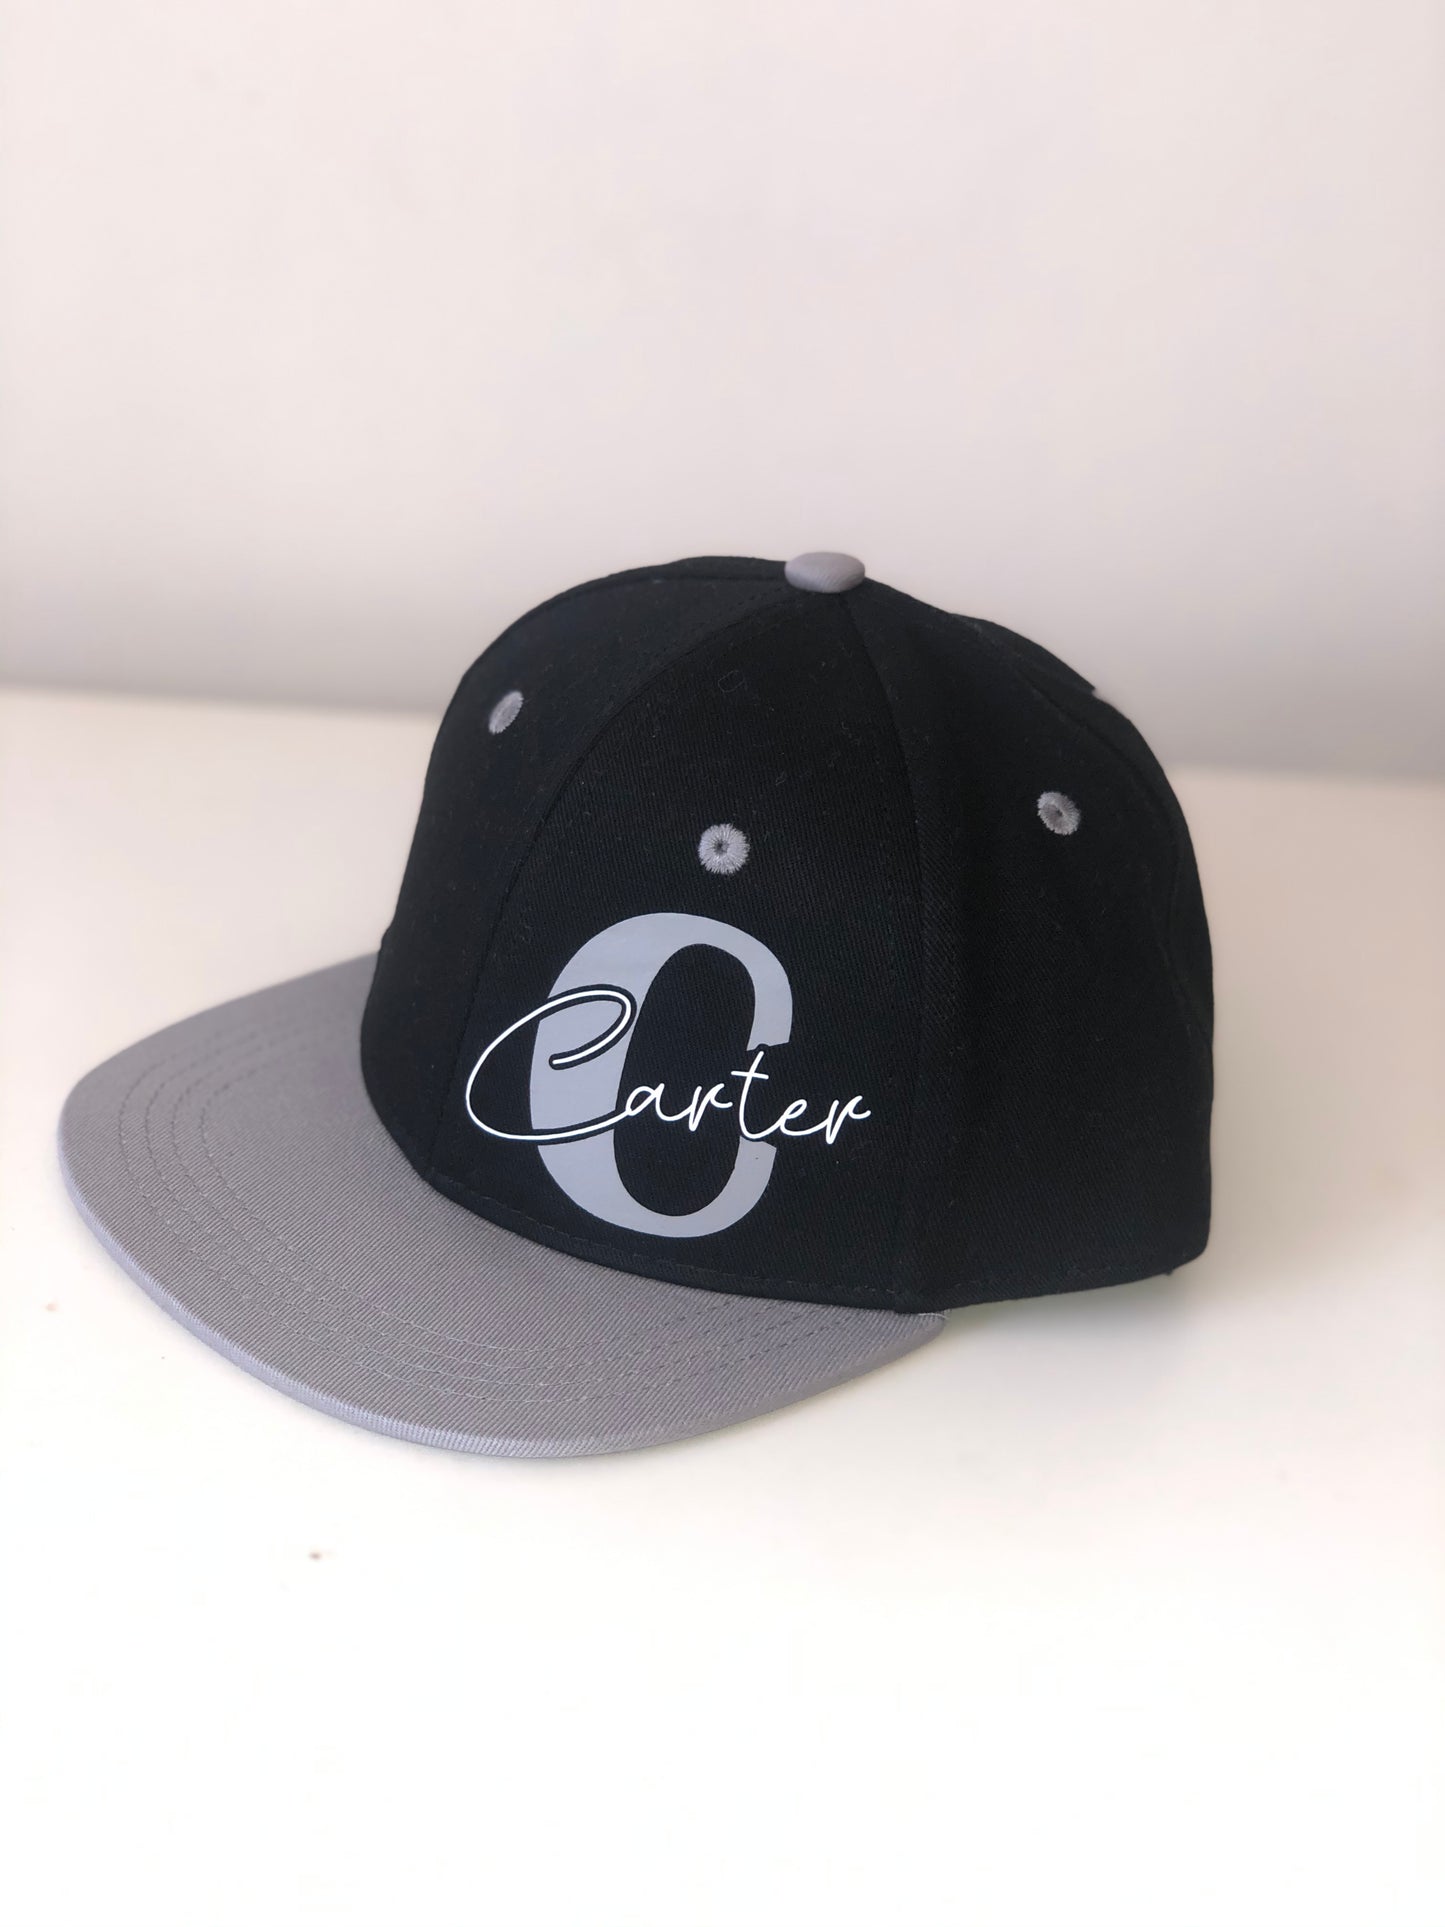 Black / Grey Children’s SnapBack with Name and Initial Design